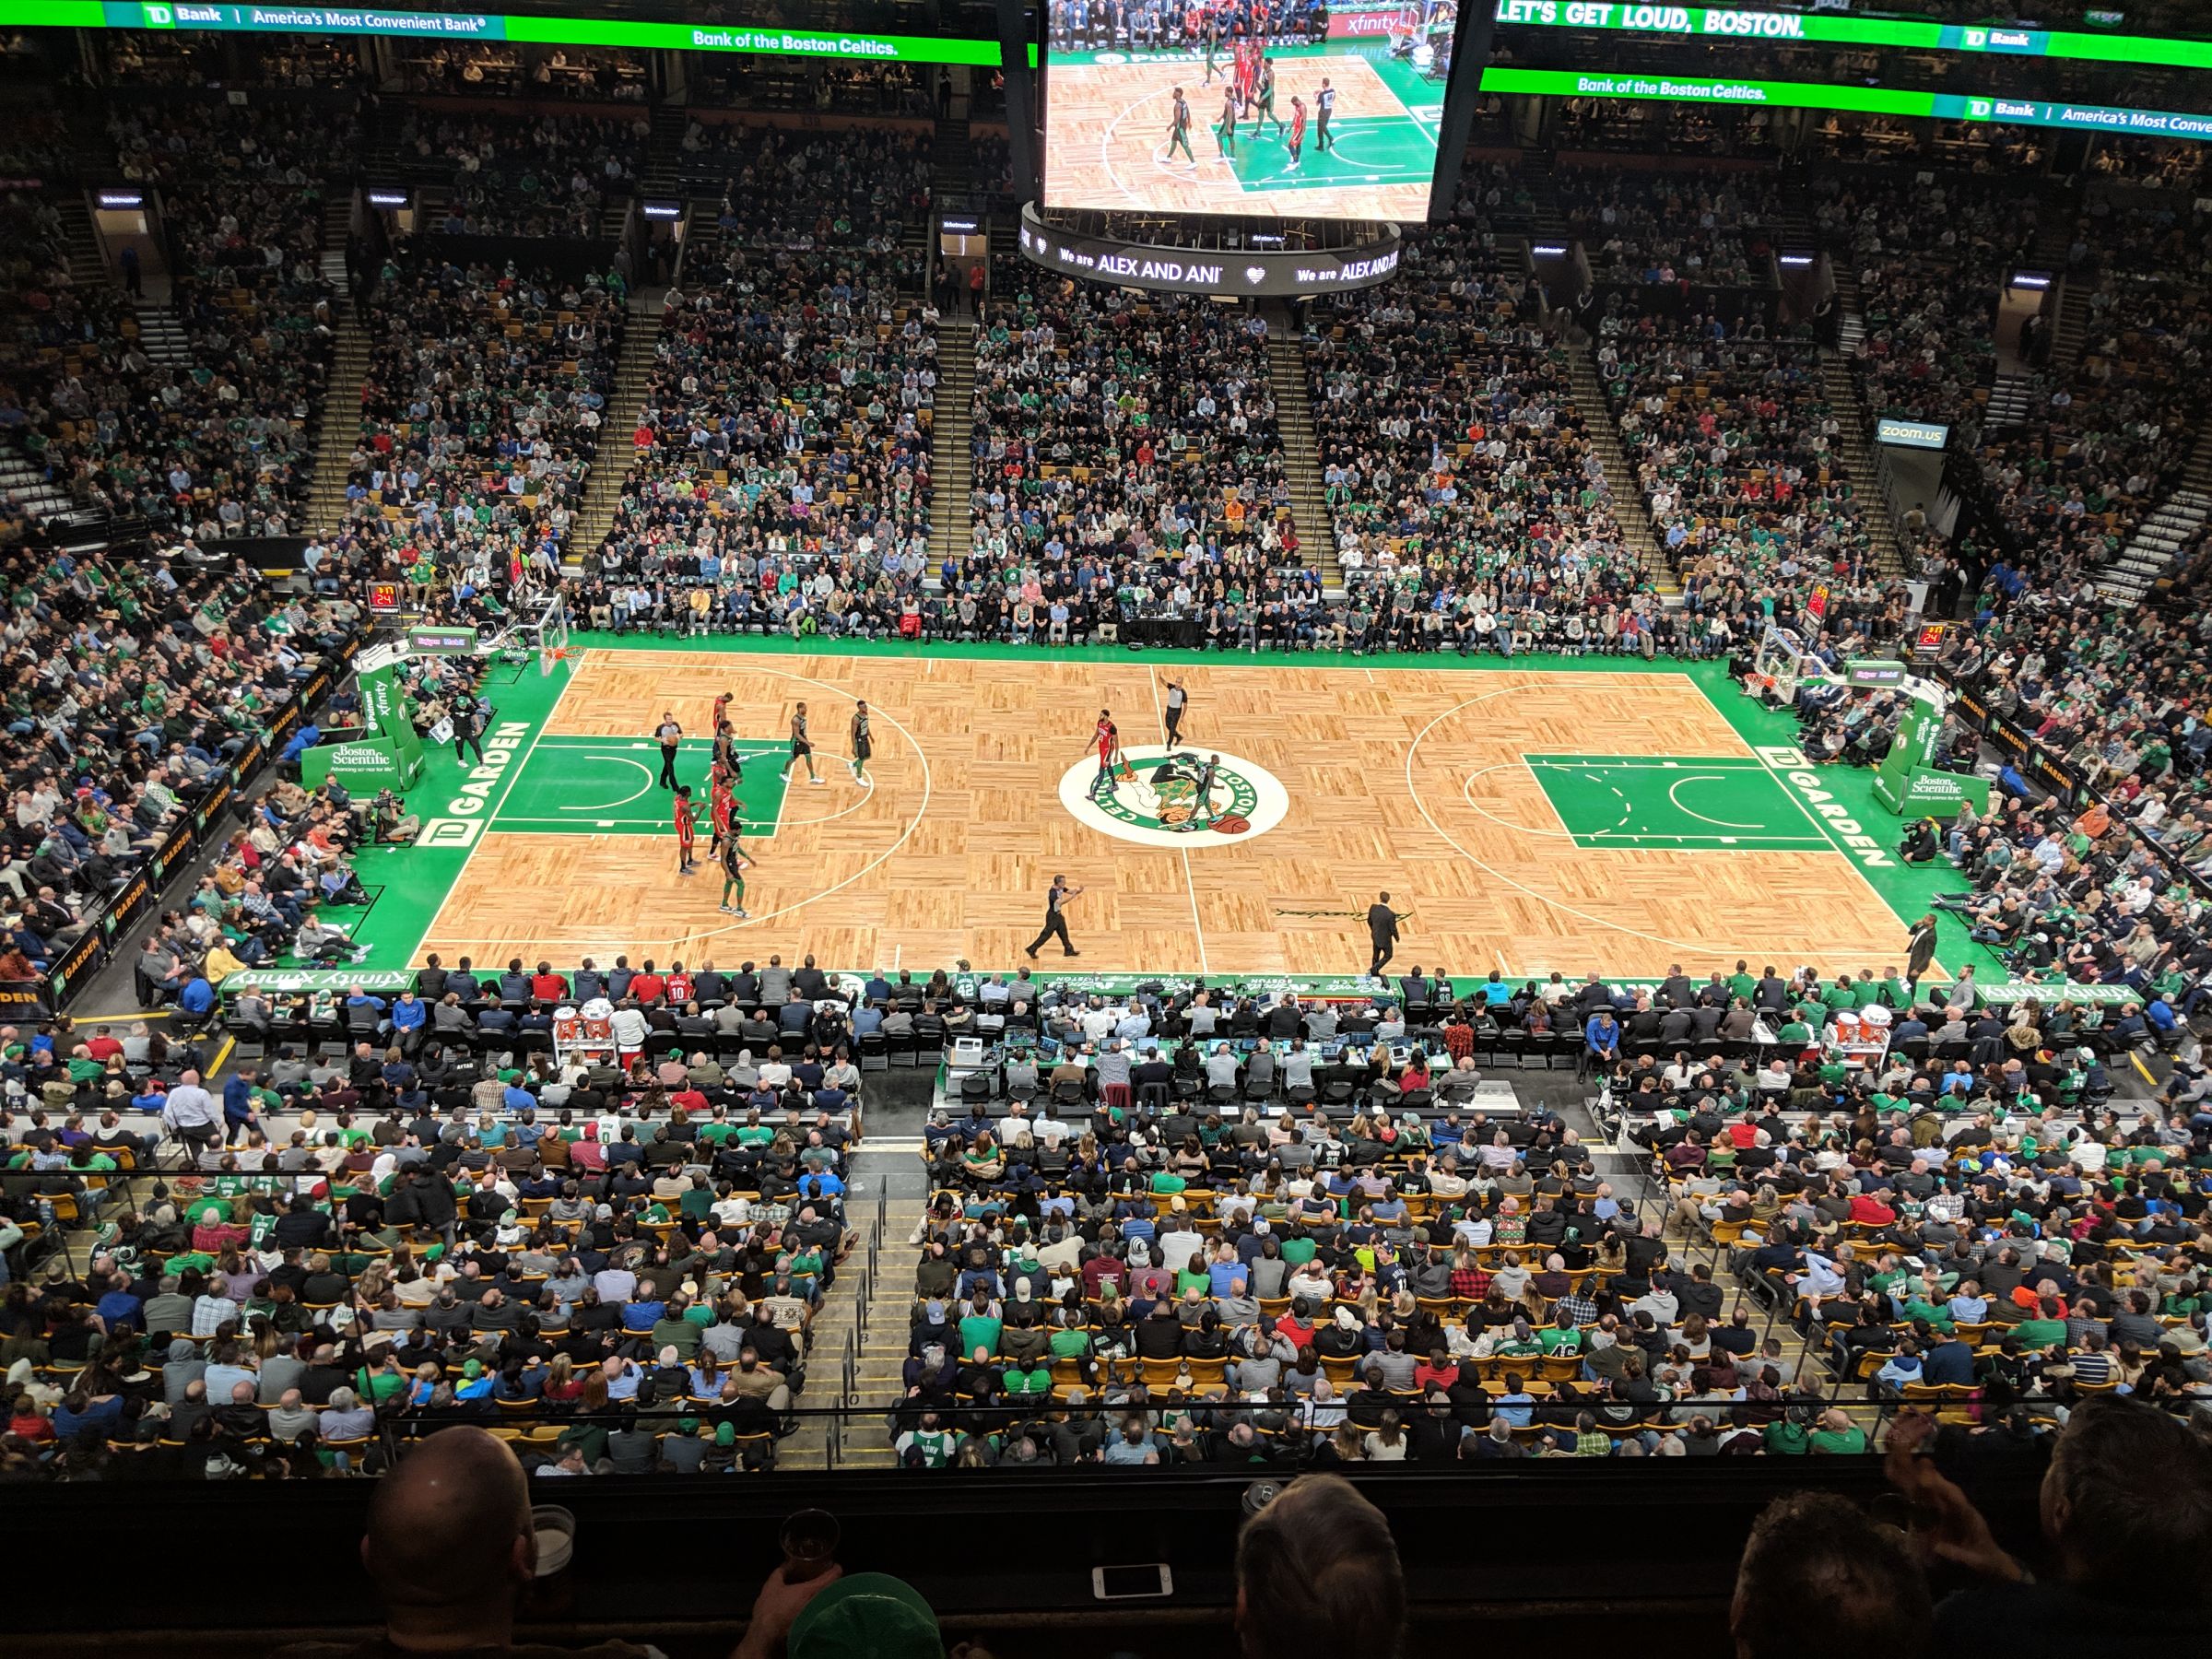 section 301, row 3 seat view  for basketball - td garden